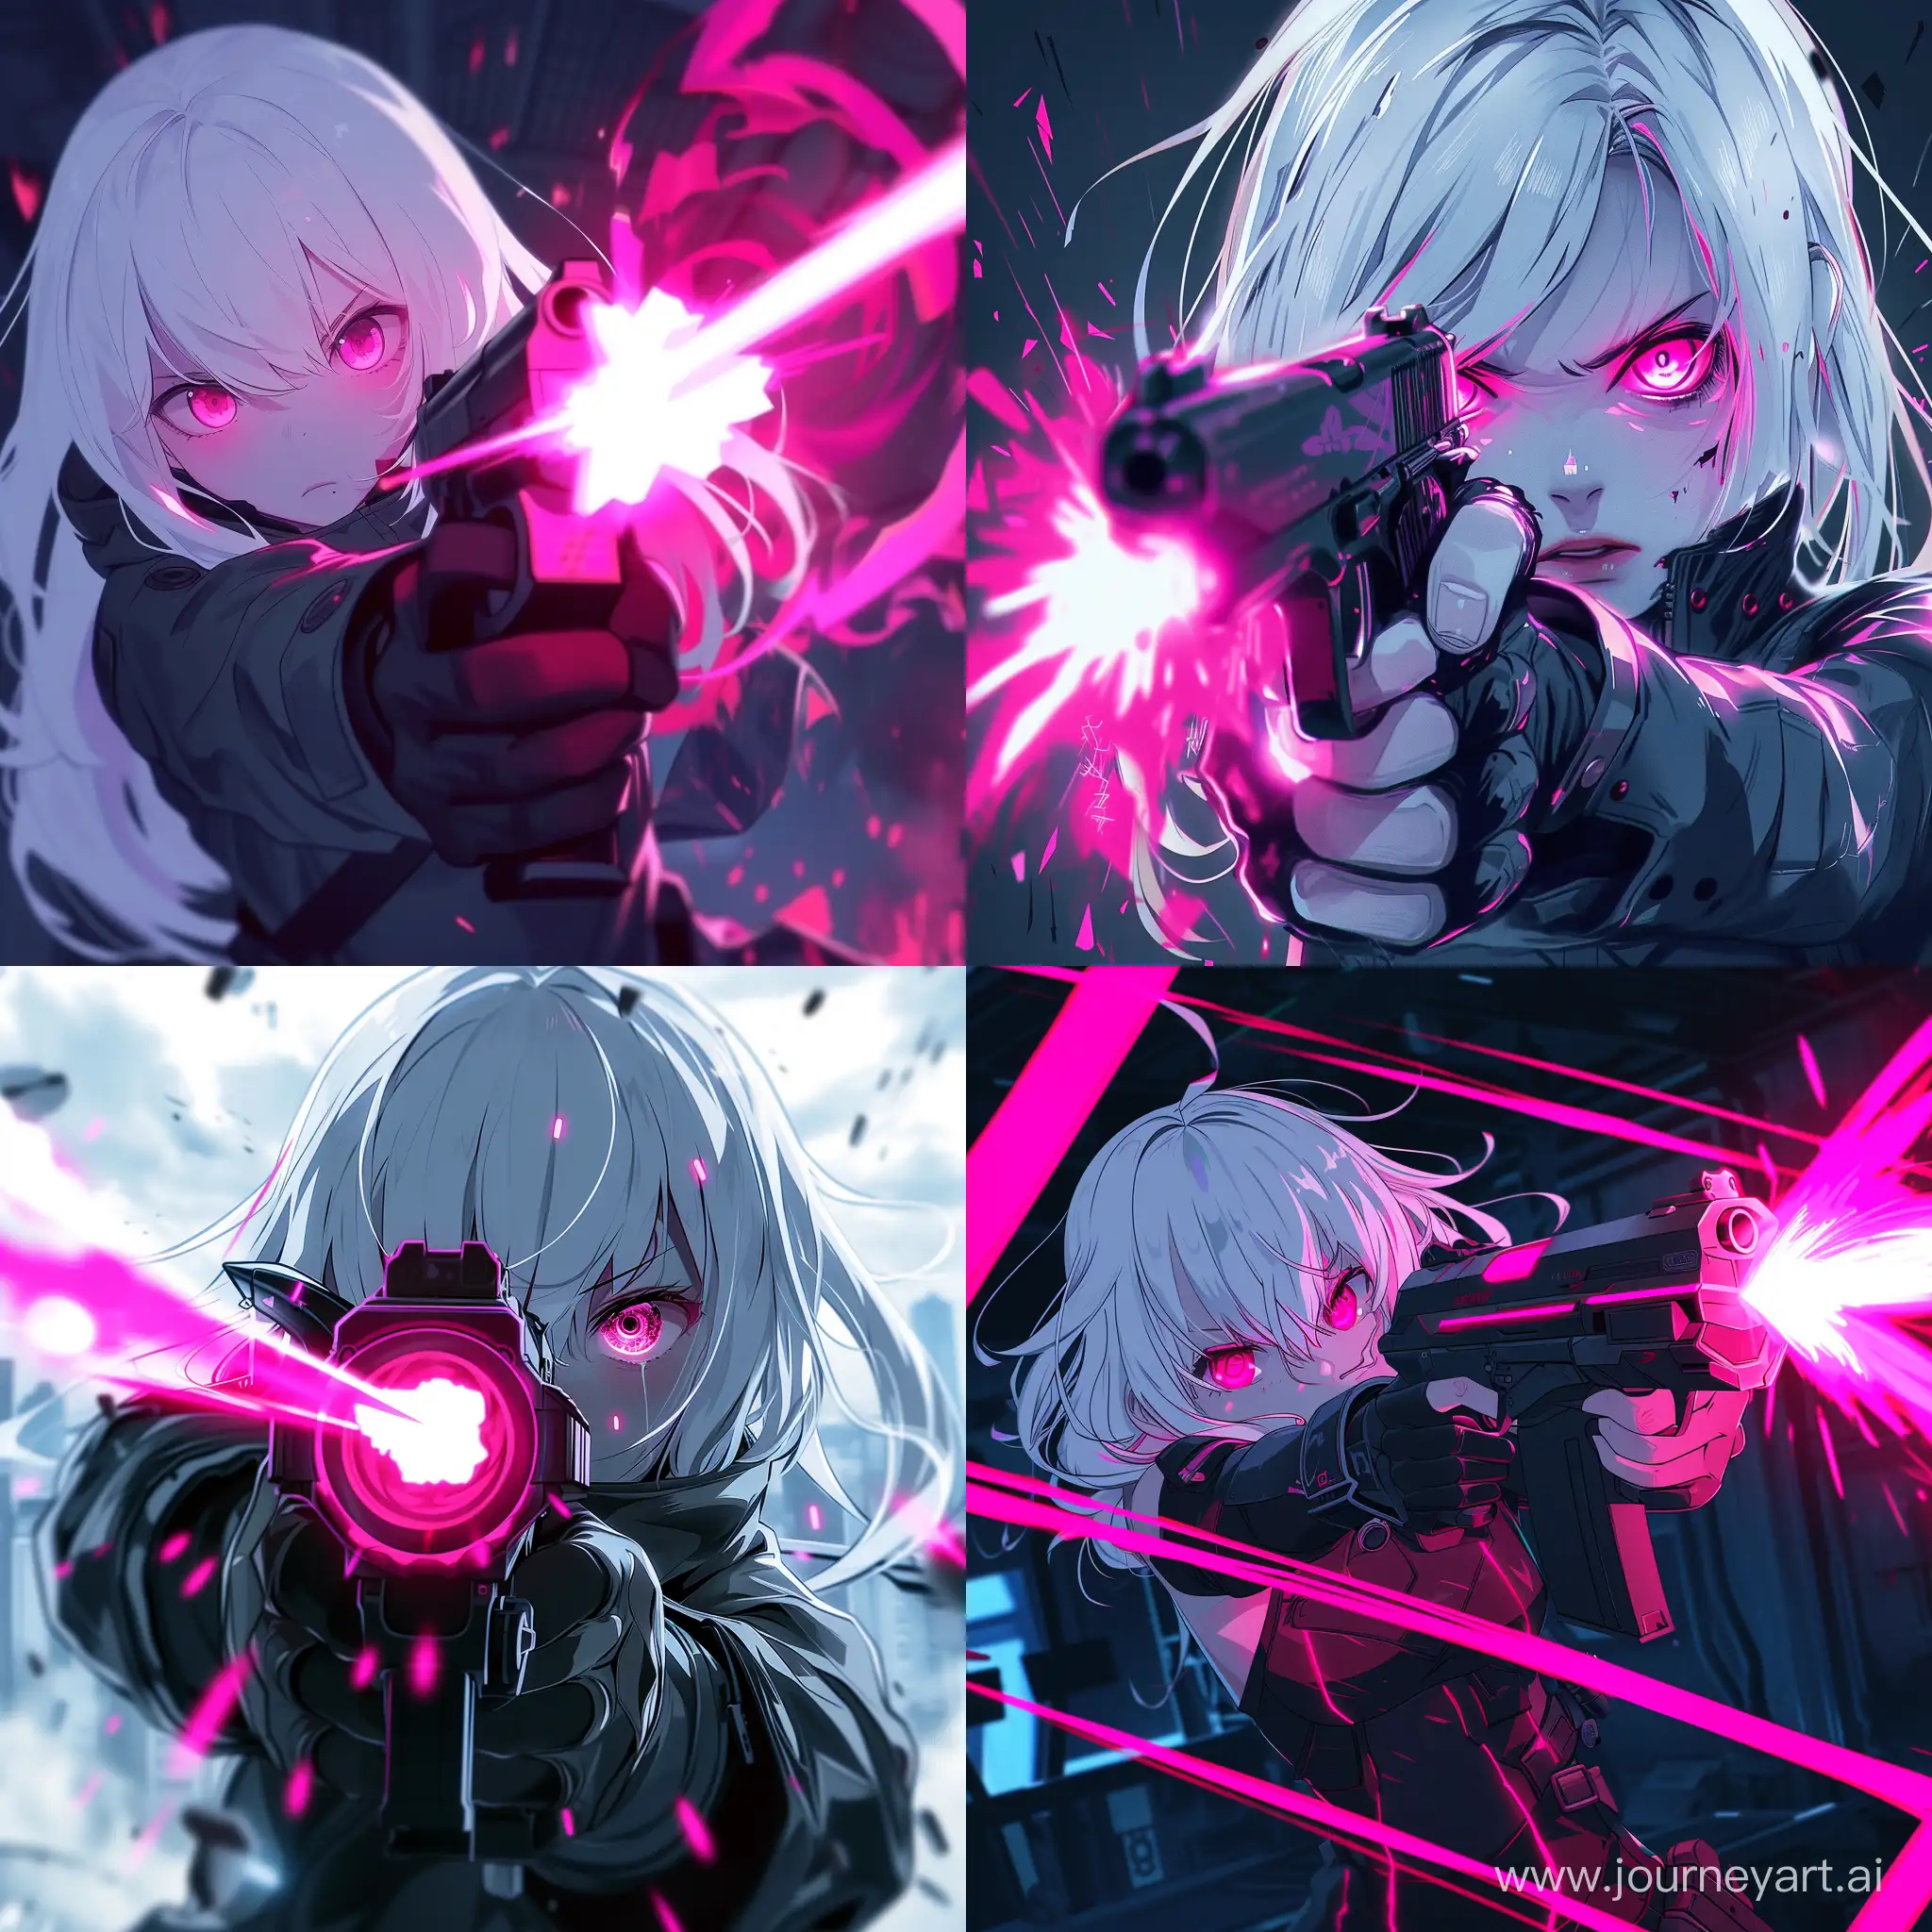 Neon Glitch Cutecore anime art. girl with white hair pink eyes shooting out of the gun